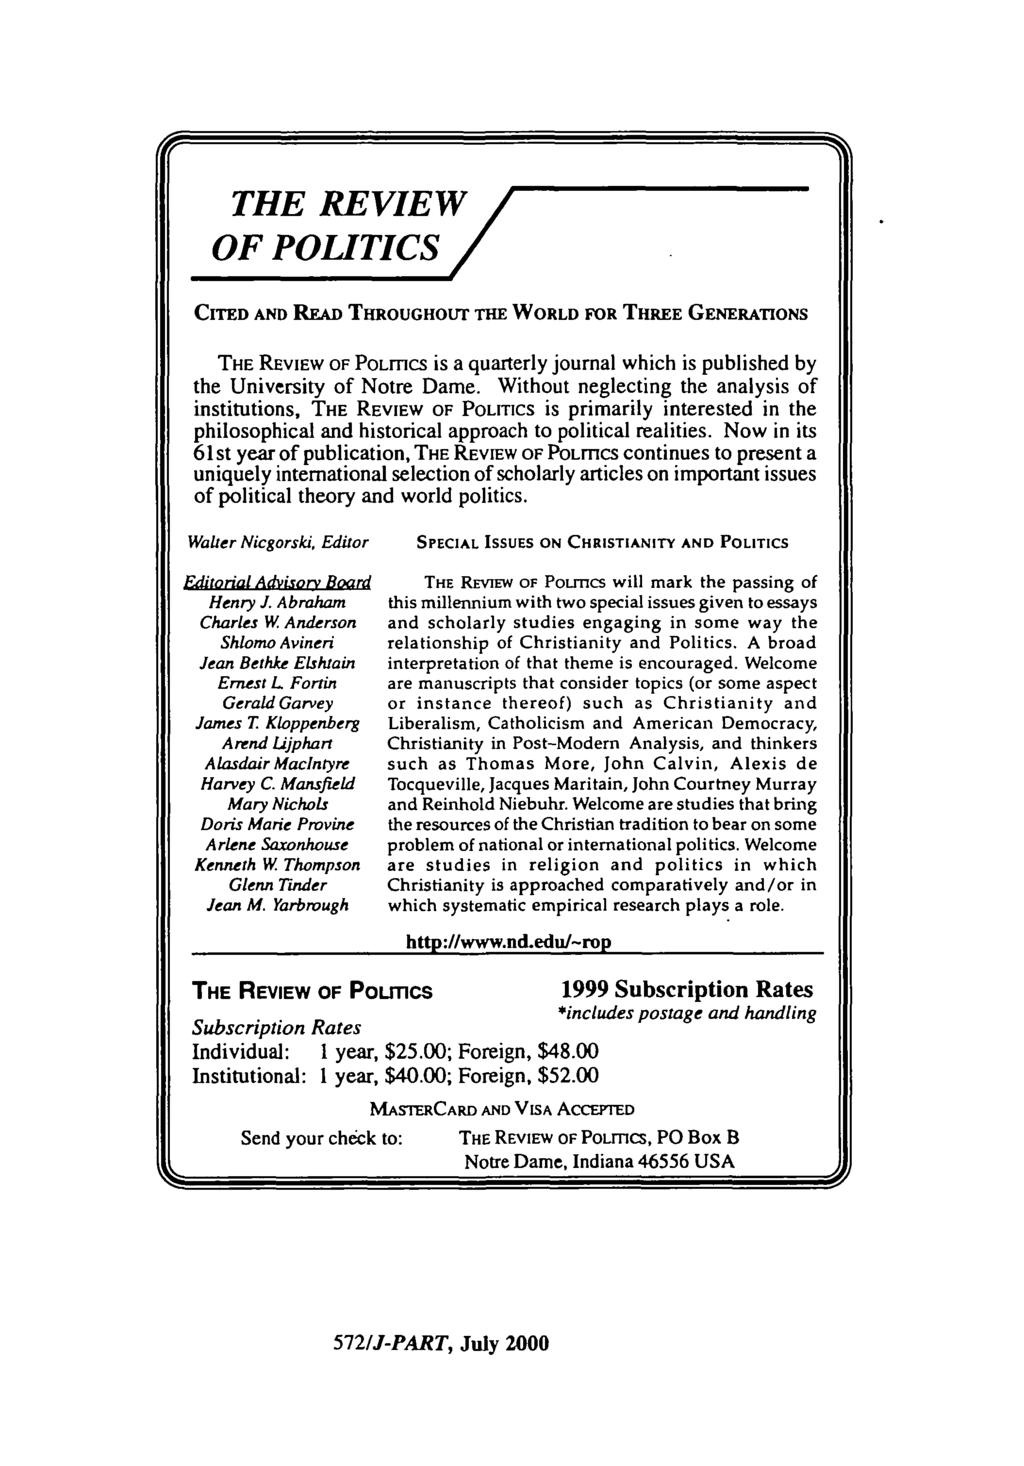 THE REVIEW OF POLITICS CITED AND READ THROUGHOUT THE WORLD FOR THREE GENERATIONS THE REVIEW OF POLITICS is a quarterly journal which is published by the University of Notre Dame.